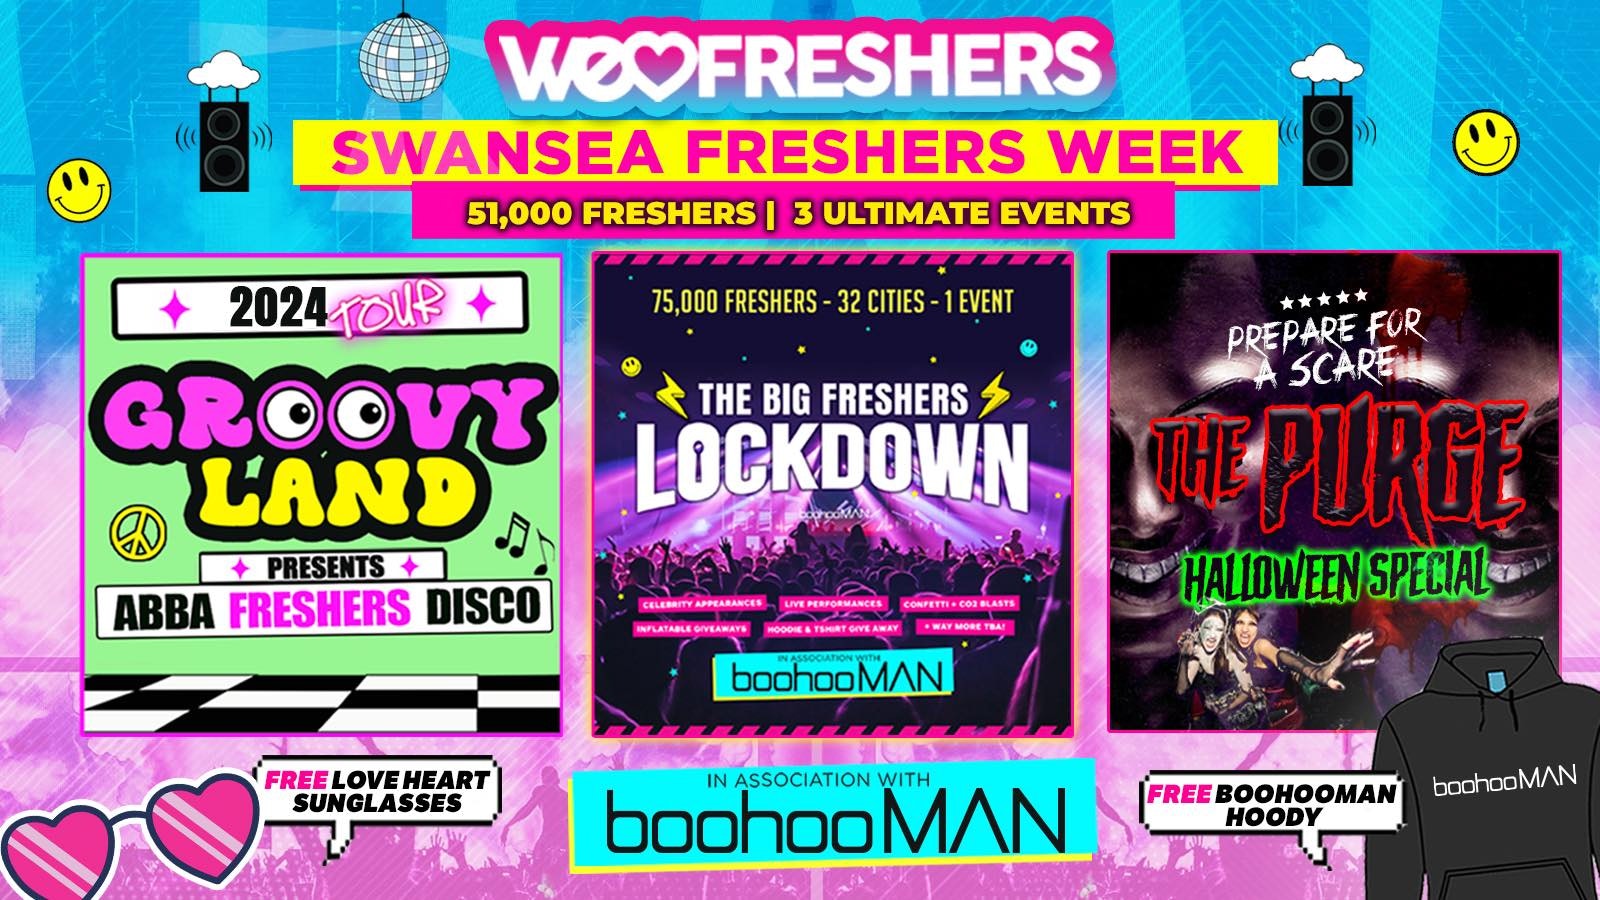 WE LOVE SWANSEA FRESHERS 2024 in association with boohooMAN ❗FREE BOOHOOMAN HOODIE TODAY ONLY❗